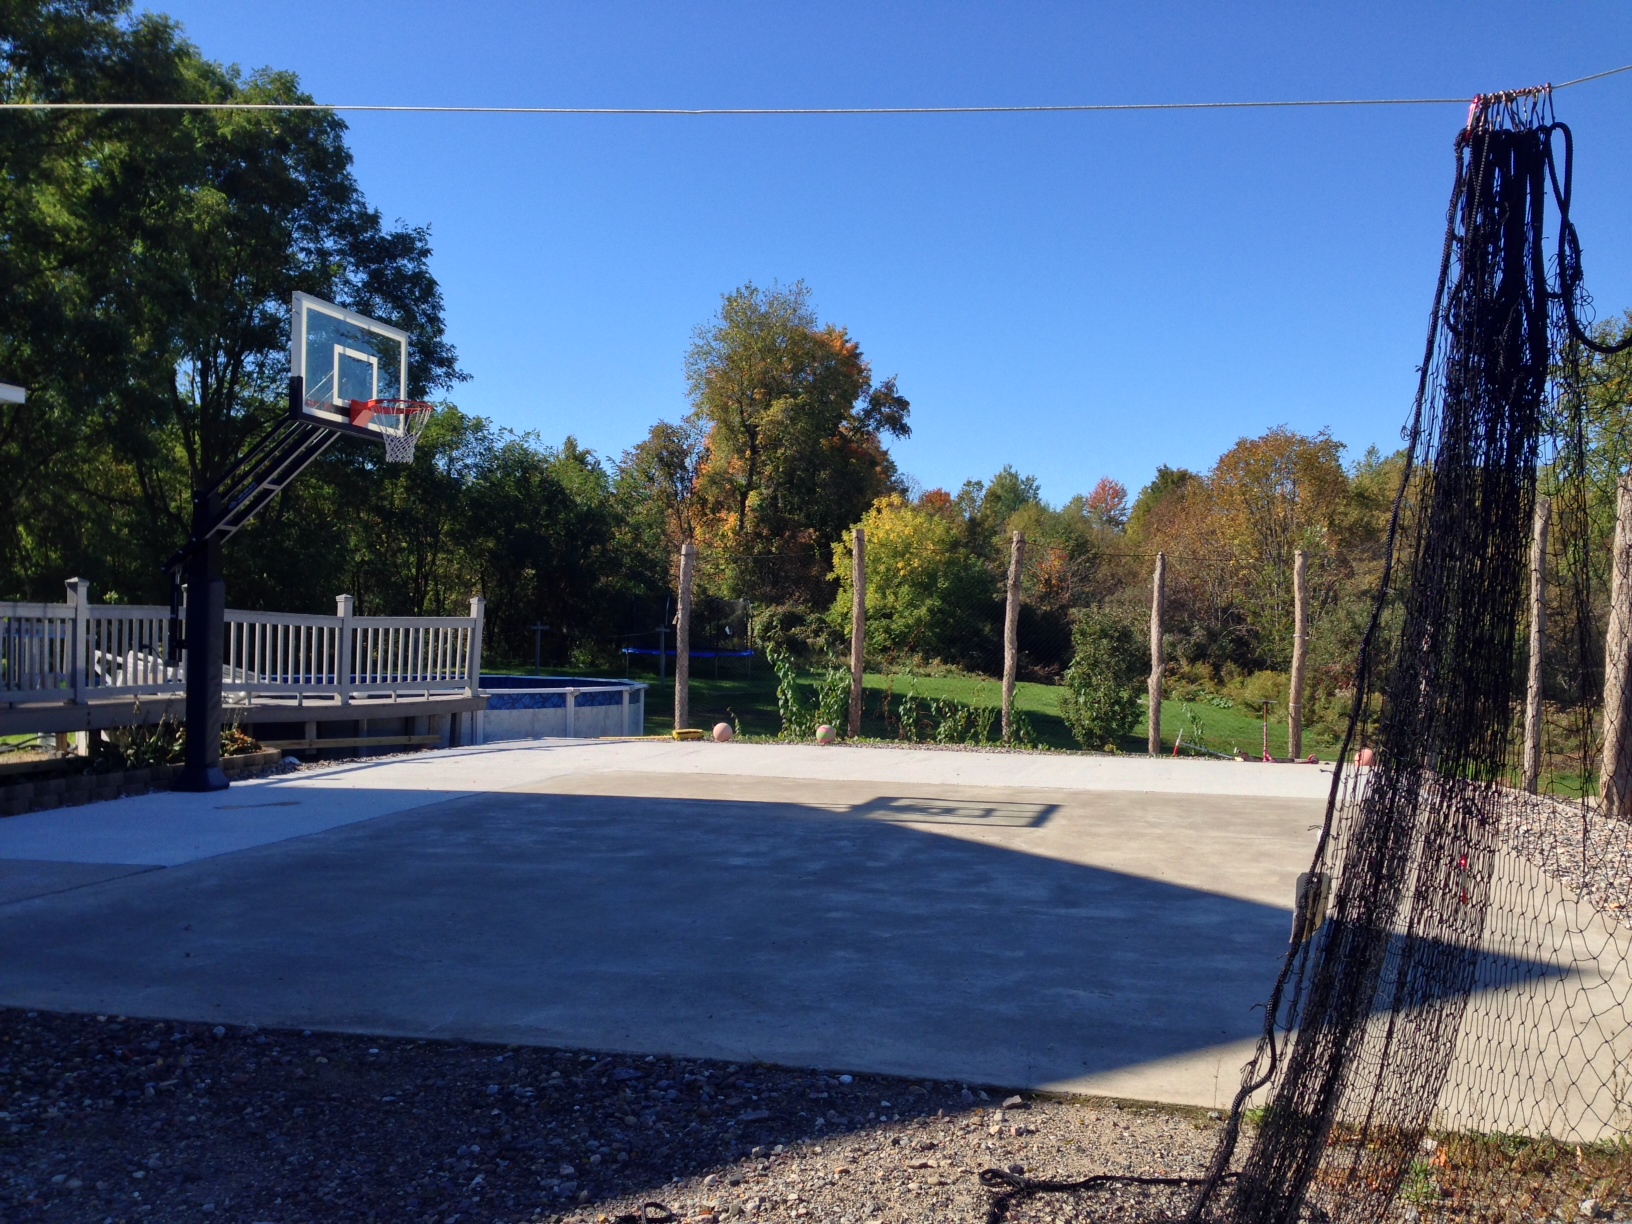 On the right you can see the net is designed to wrap around the court to keep the ball on the court.